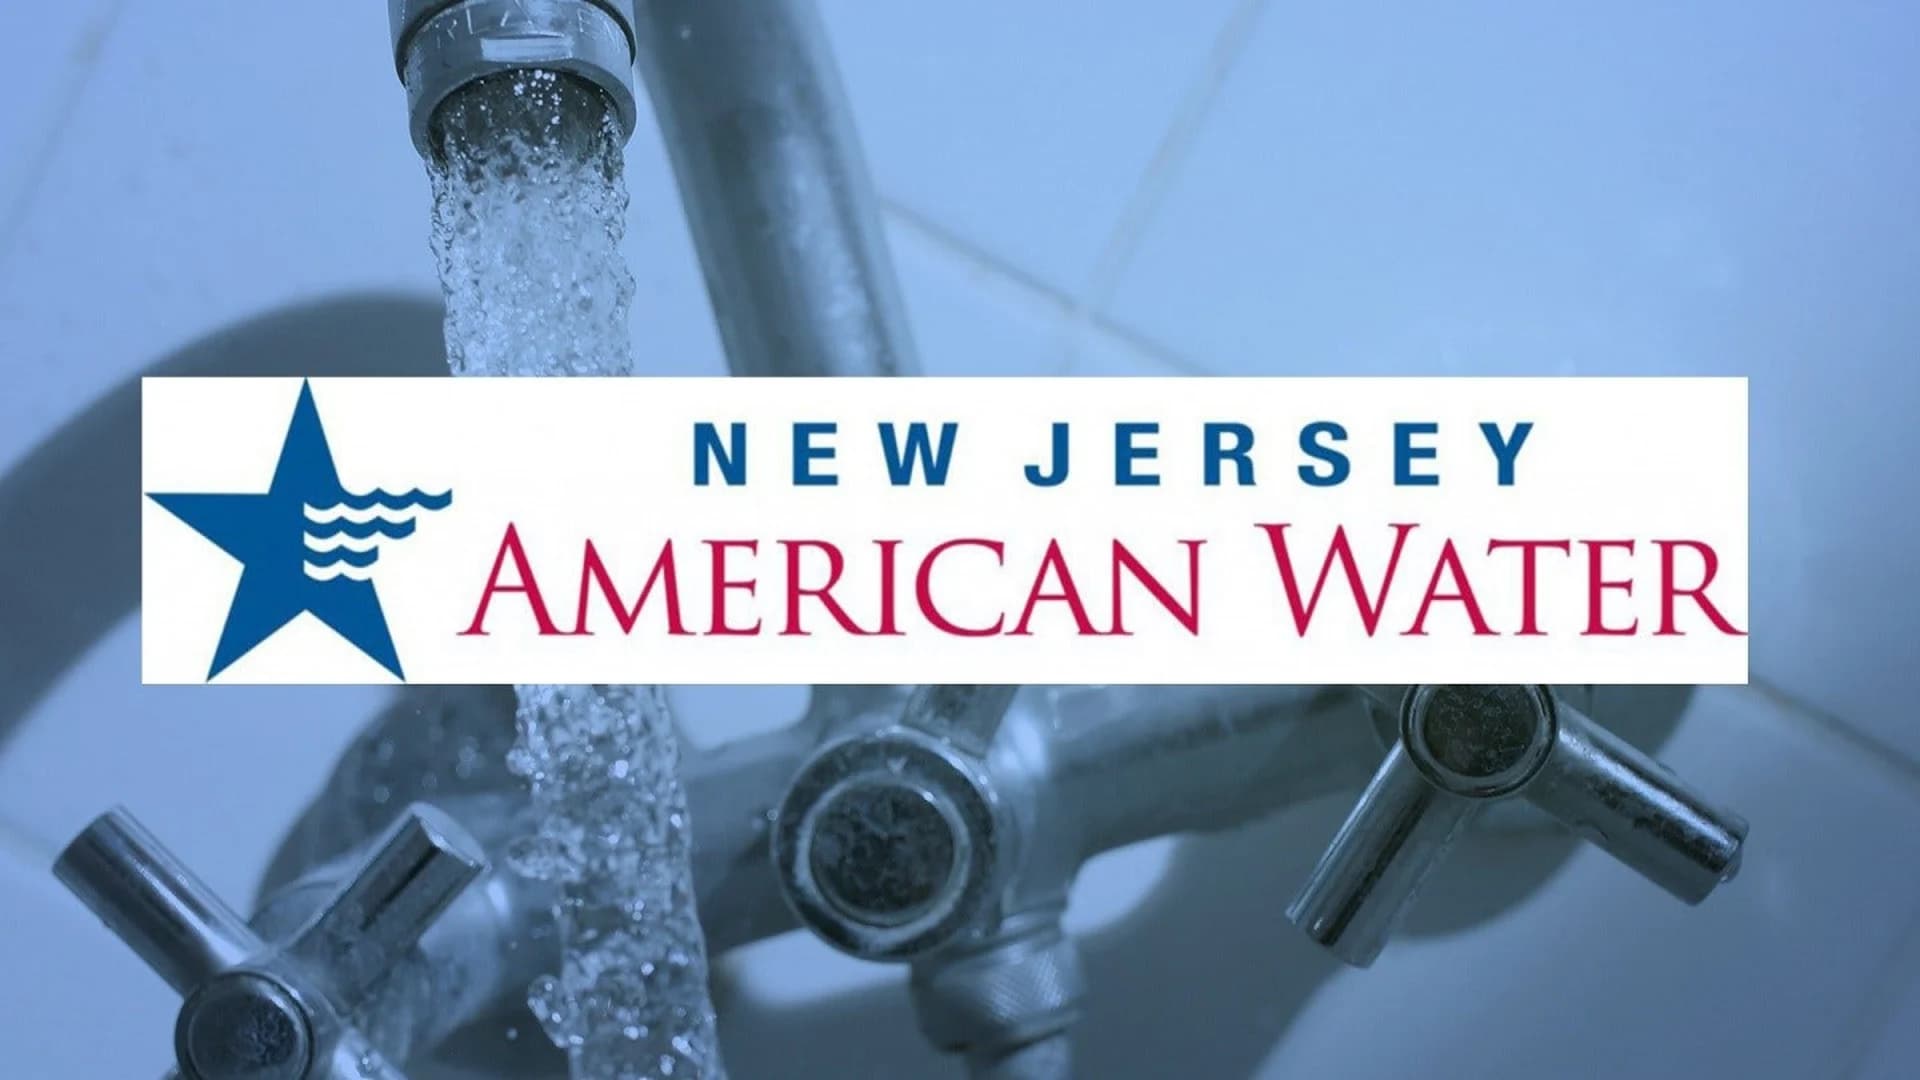 New Jersey American Water company hiking rates by 12 percent